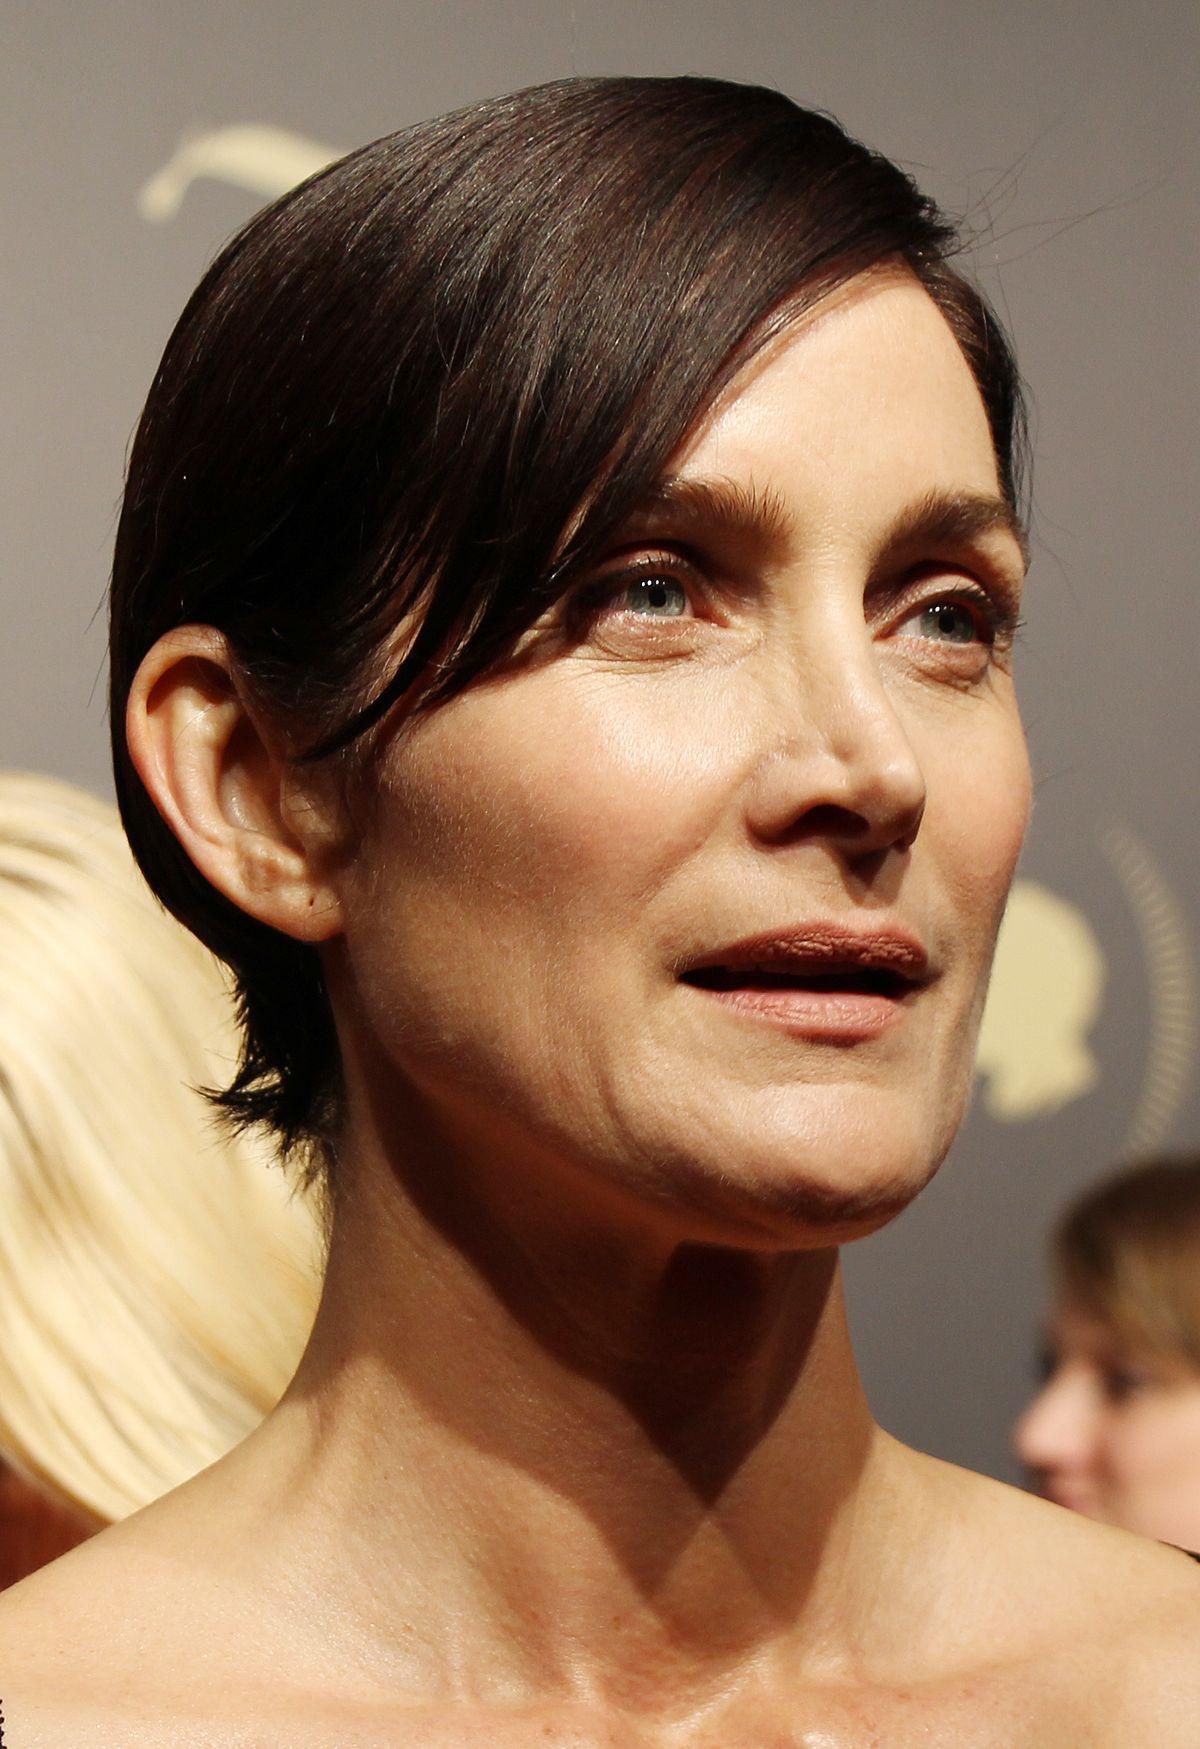 60+ Hottest Carrie-Anne Moss Boobs Pictures Will Make You Fall In Love Like Crazy 50